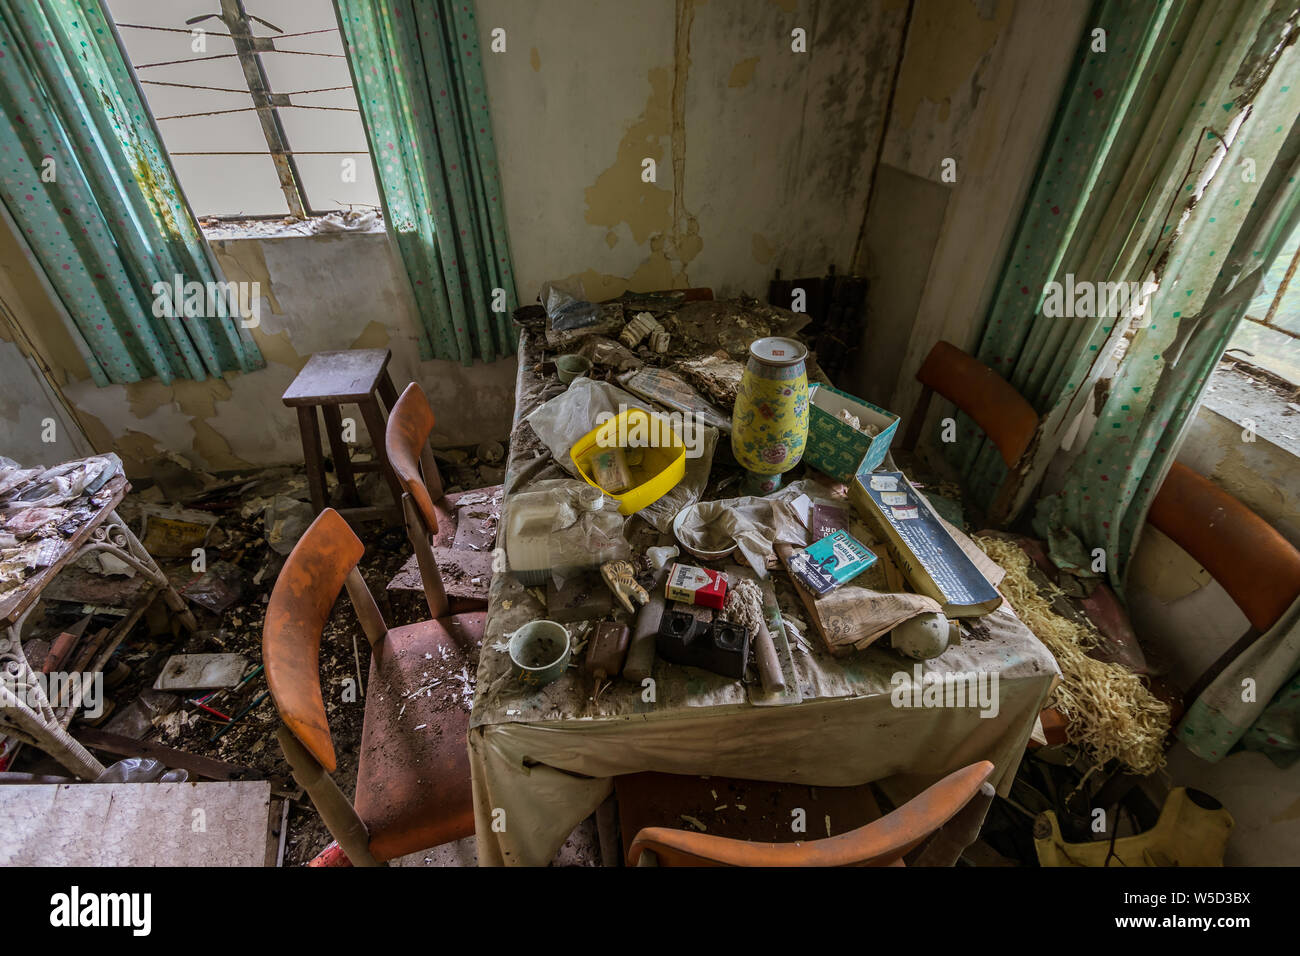 The interior of the abandoned house with household items in Ma Wan village, Hong Kong Stock Photo